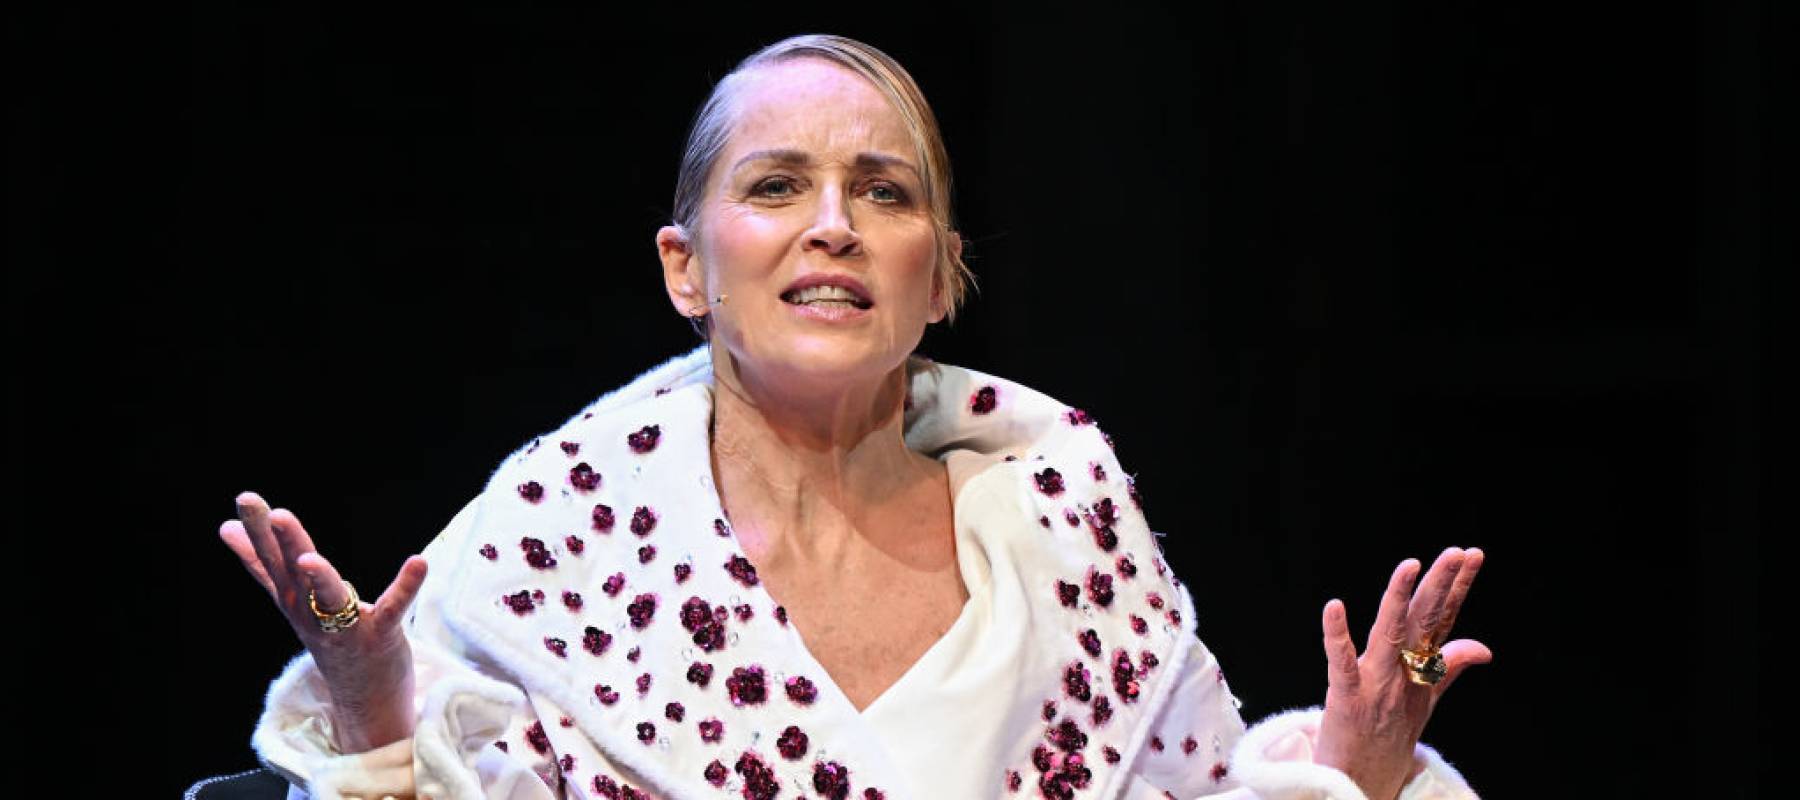 Sharon Stone on stage with an inquisitive look on her face, holding her arms up in a shrug.